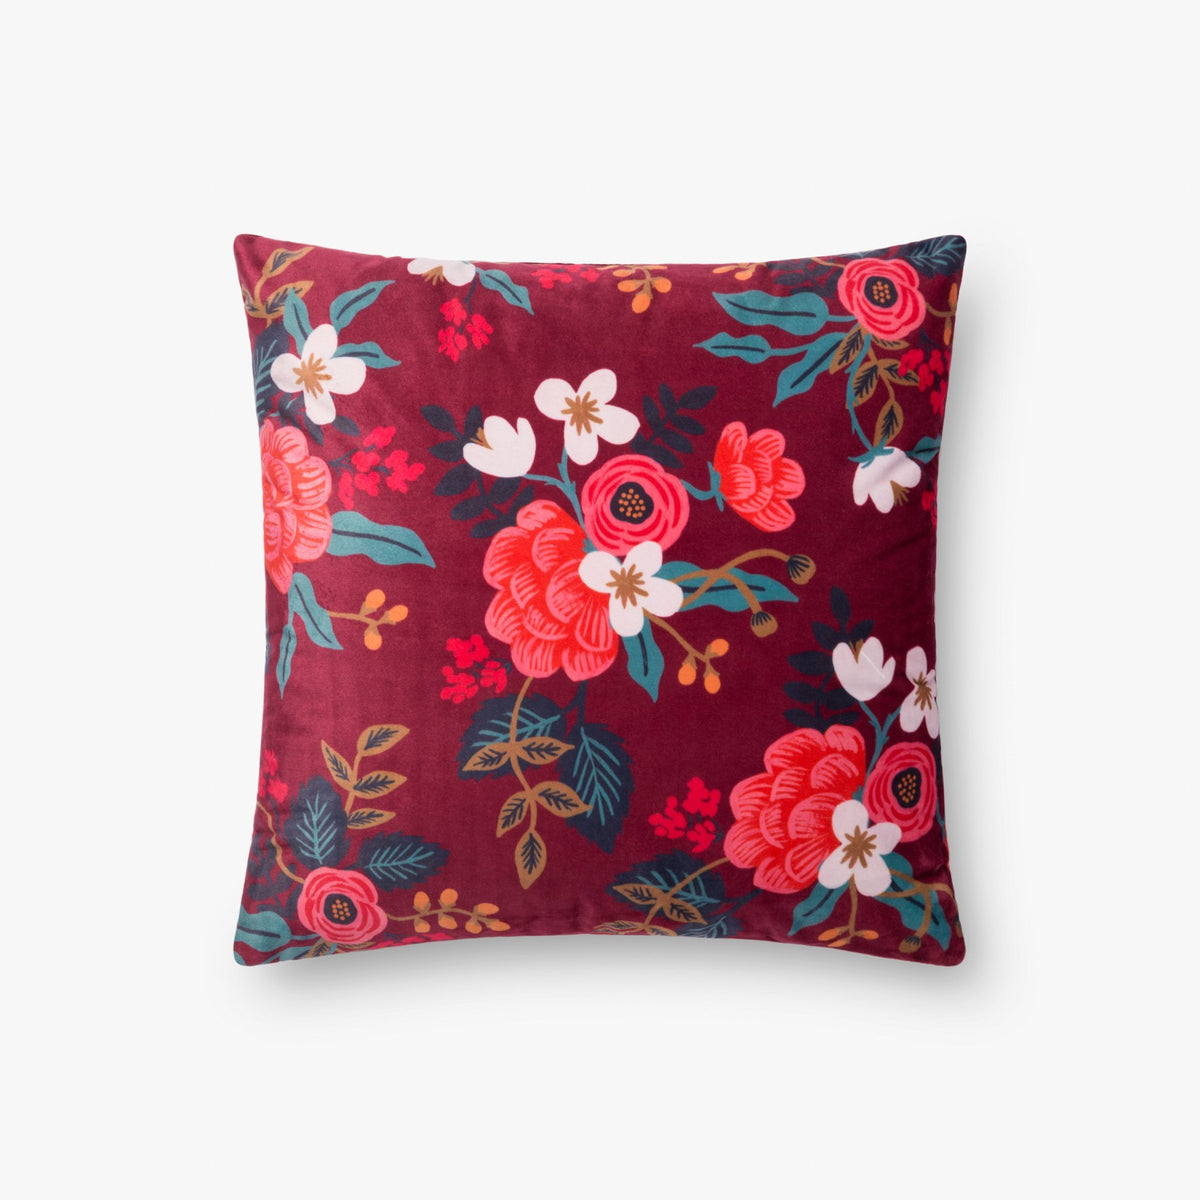 Rifle Paper Co P6025 Burgundy Pillow - Rug & Home